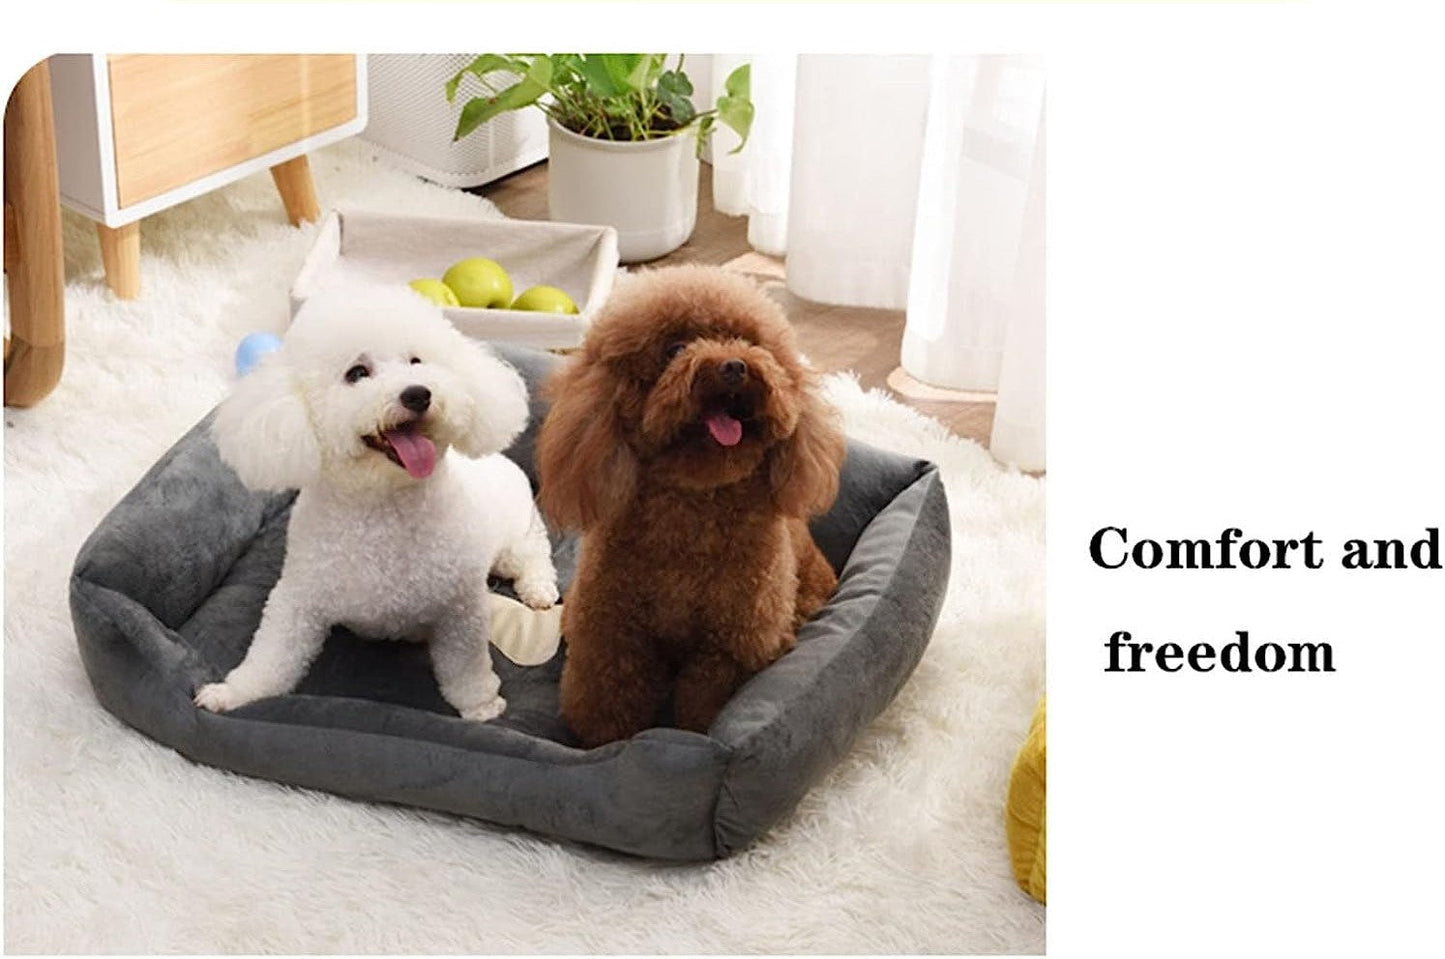 Super Soft Dog Beds Waterproof Bottom - Warm Bed For Dog & Cat - Cream and Red